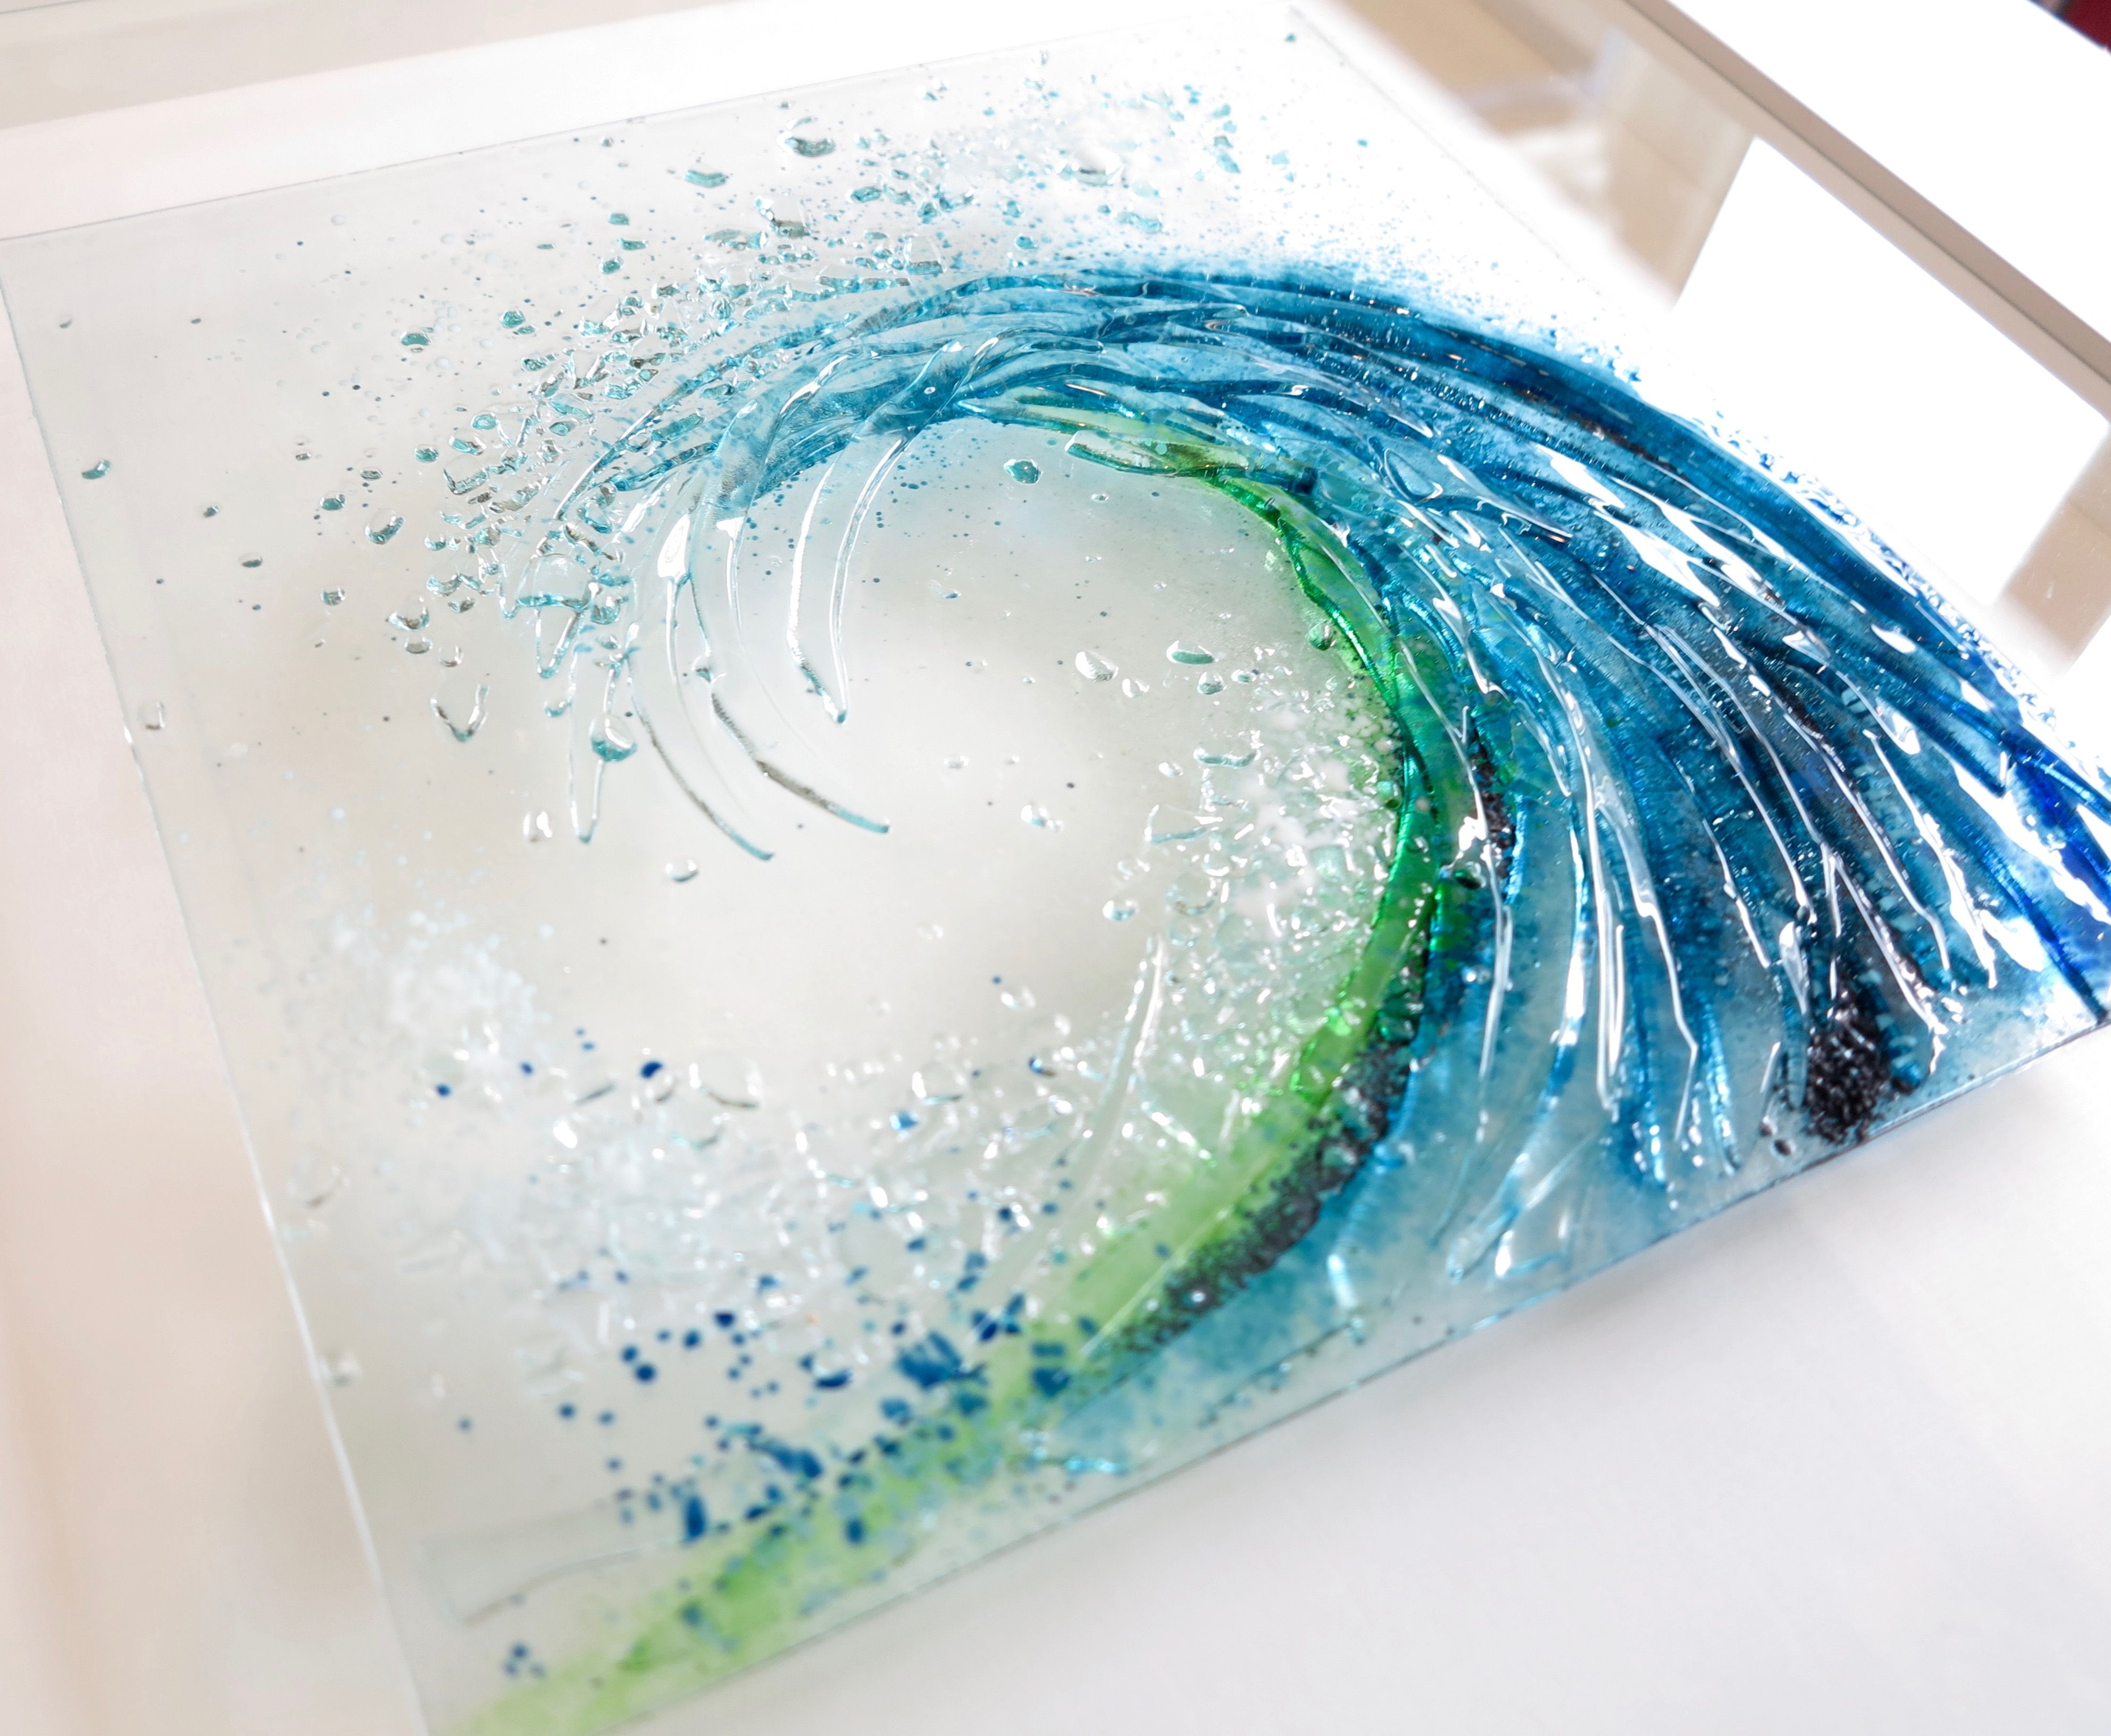 Glass Art - Fused Glass Inspired by the Ocean